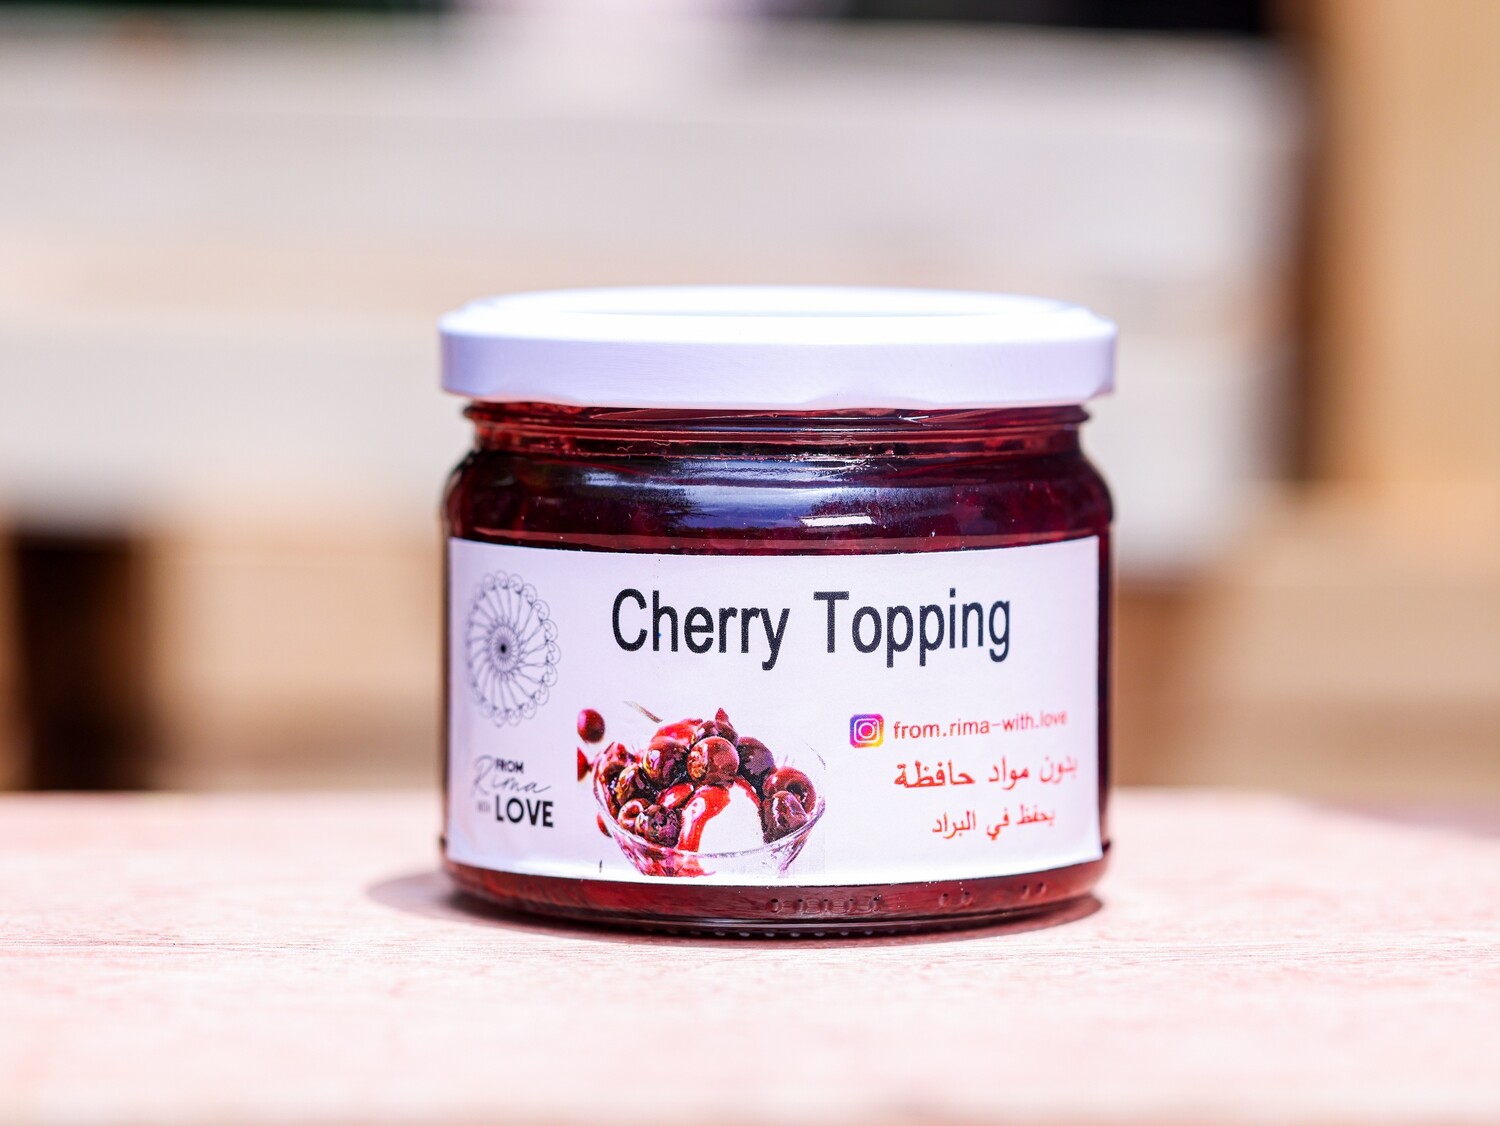 Cherry Topping Jam (Jar) - From Rima with Love